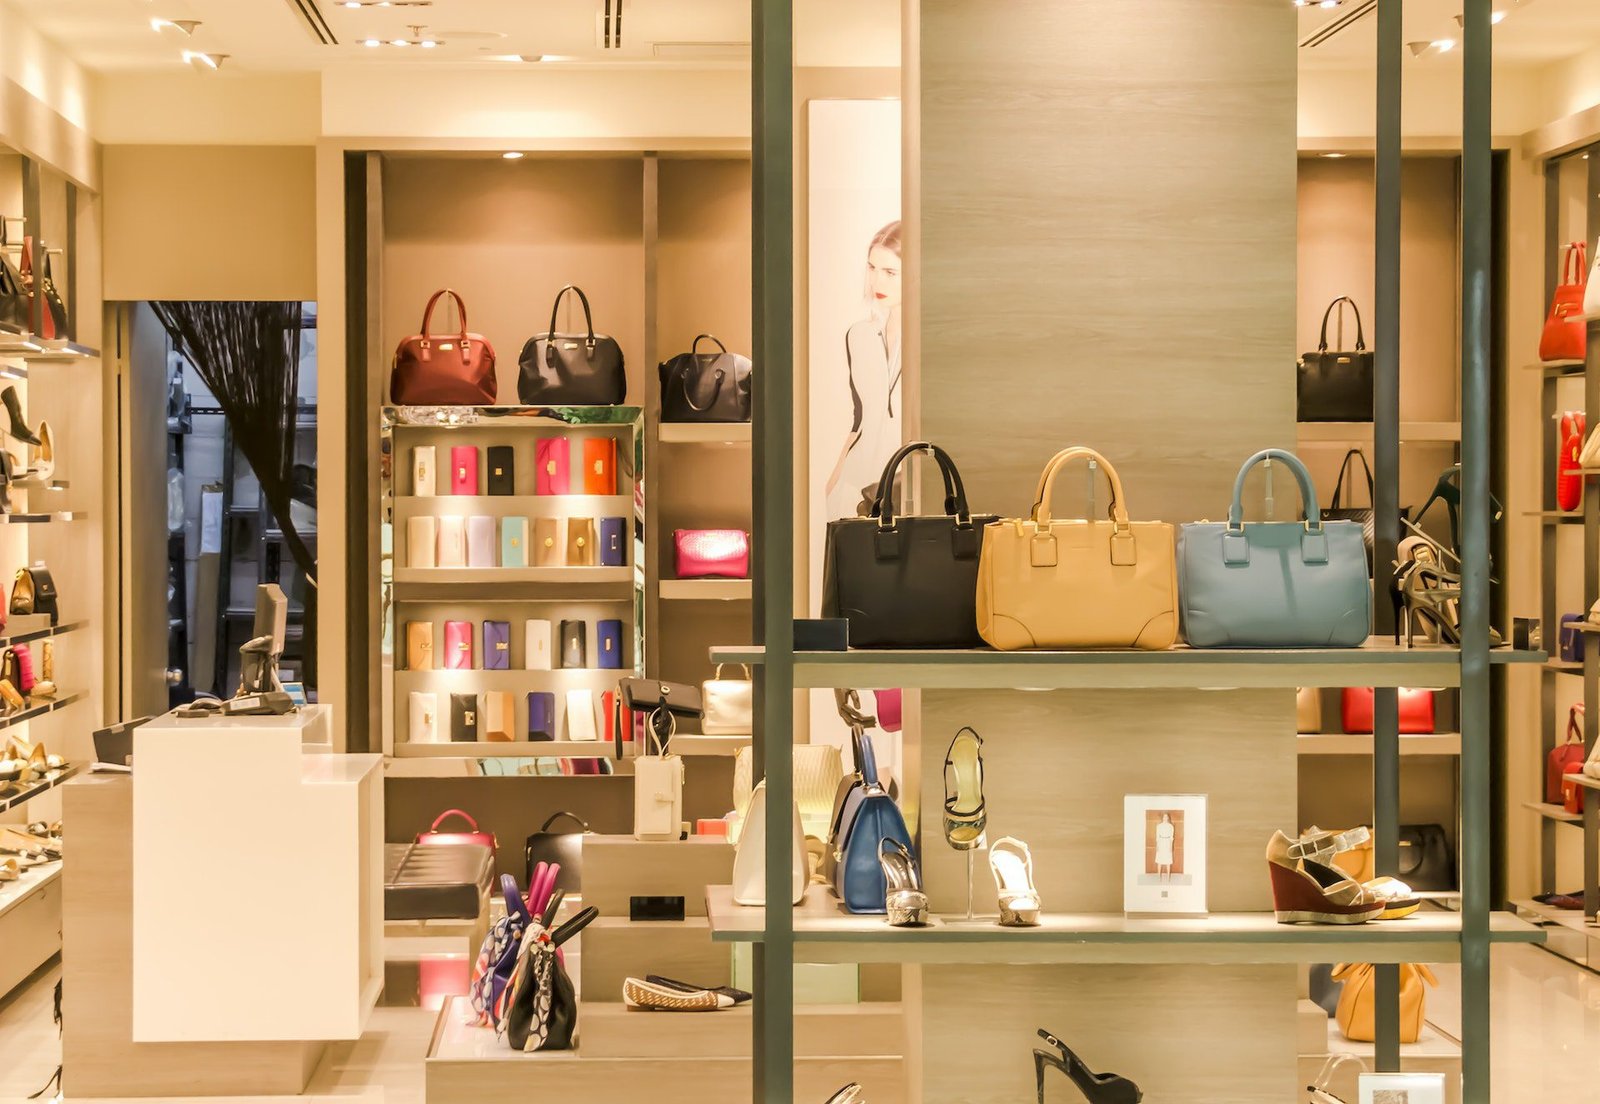 Fendi Luxury Bags and Fashion Brand Shop in Florence, Italy